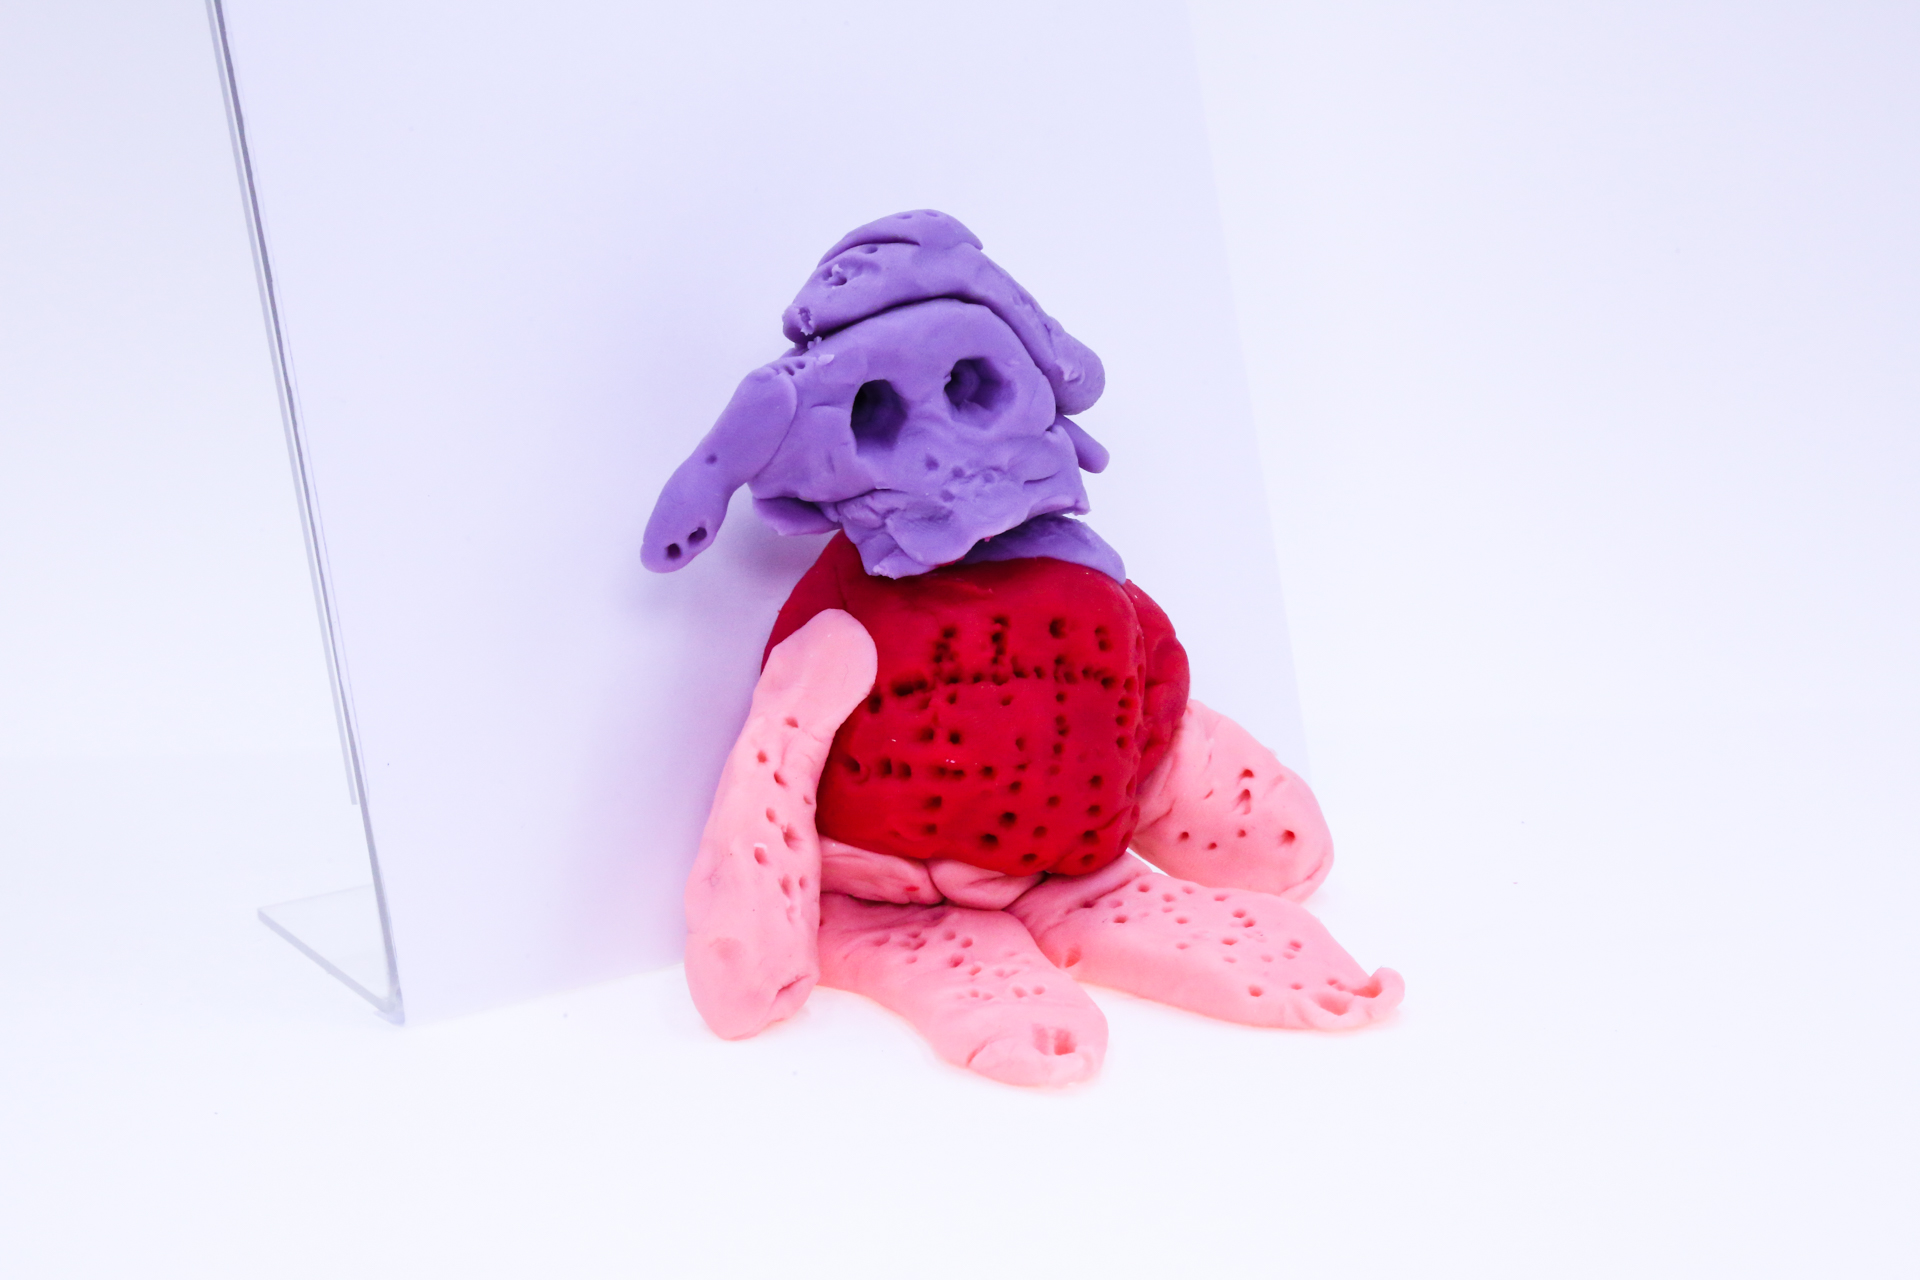 The thingy mijig is a red, pink and purple play-dough sculpture.